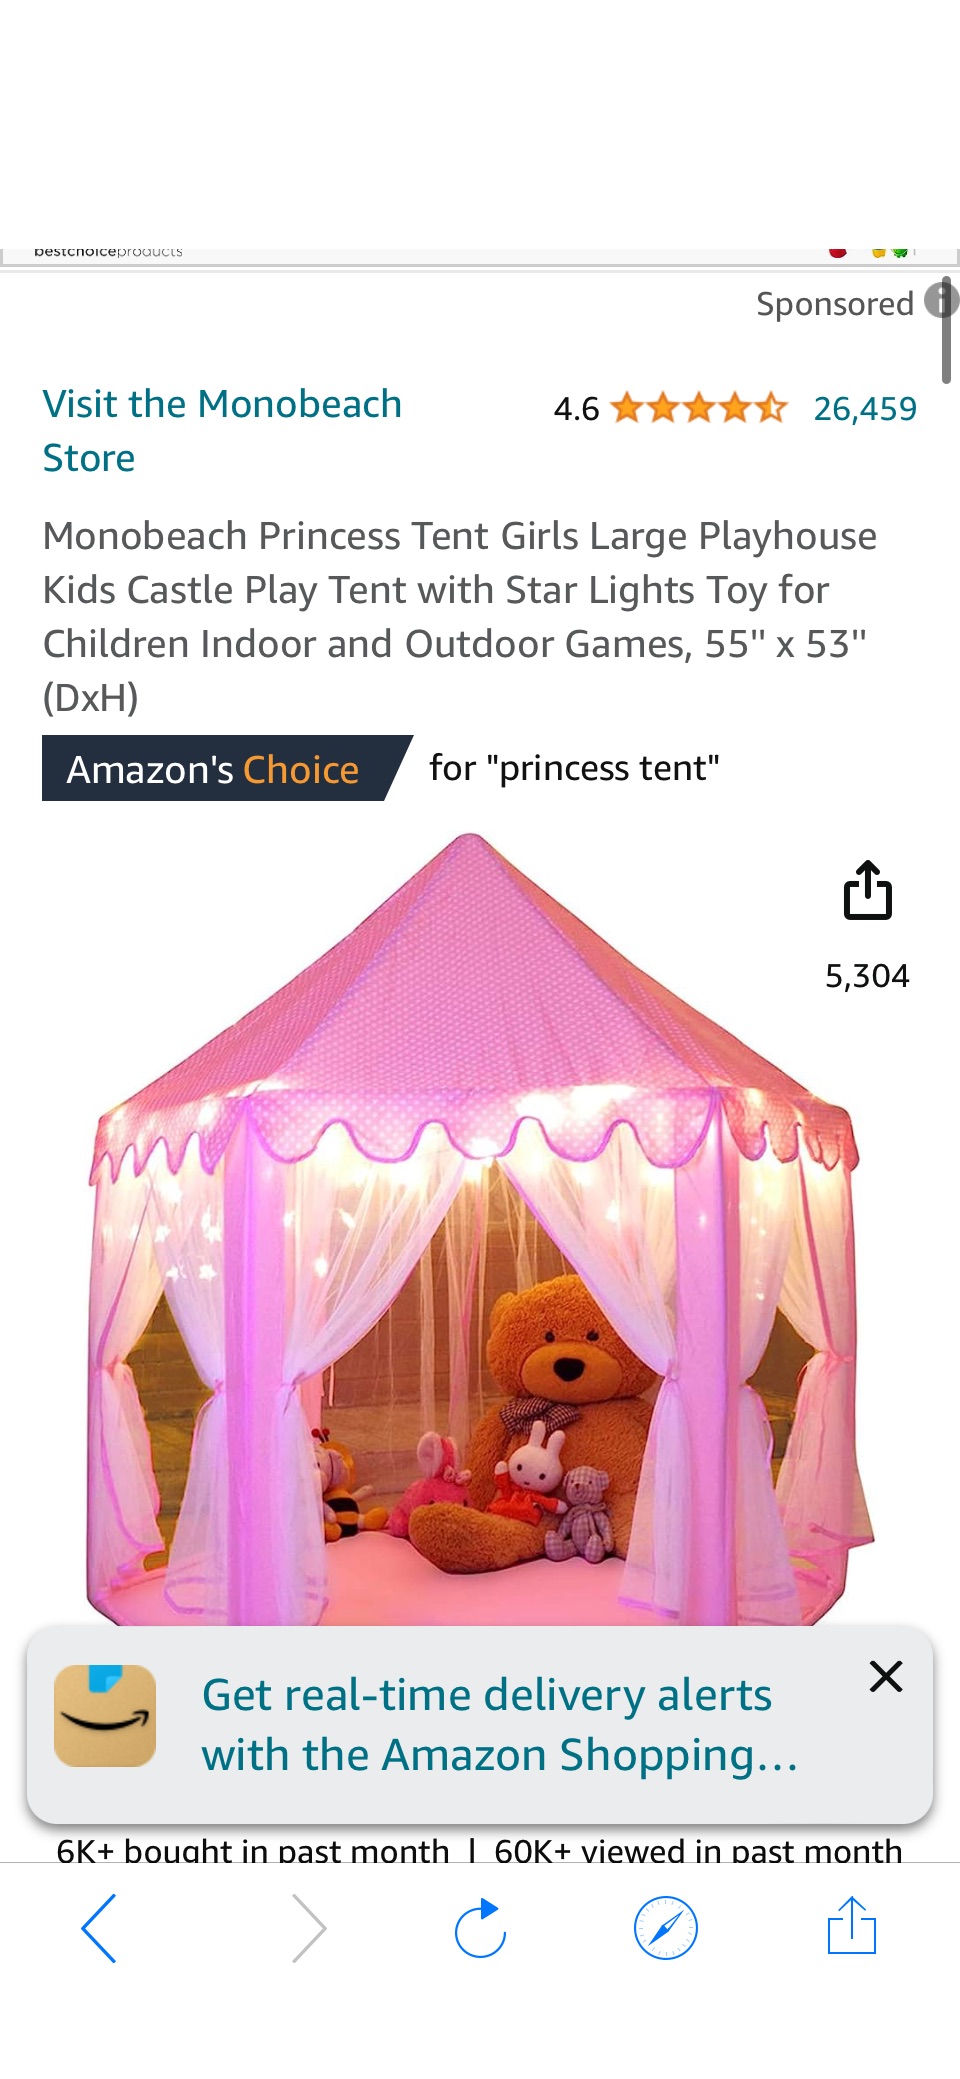 Amazon.com: Monobeach Princess Tent Girls Large Playhouse Kids Castle Play Tent with Star Lights Toy for Children Indoor and Outdoor Games, 55'' x 53'' (DxH) : Toys & Games原价55.99